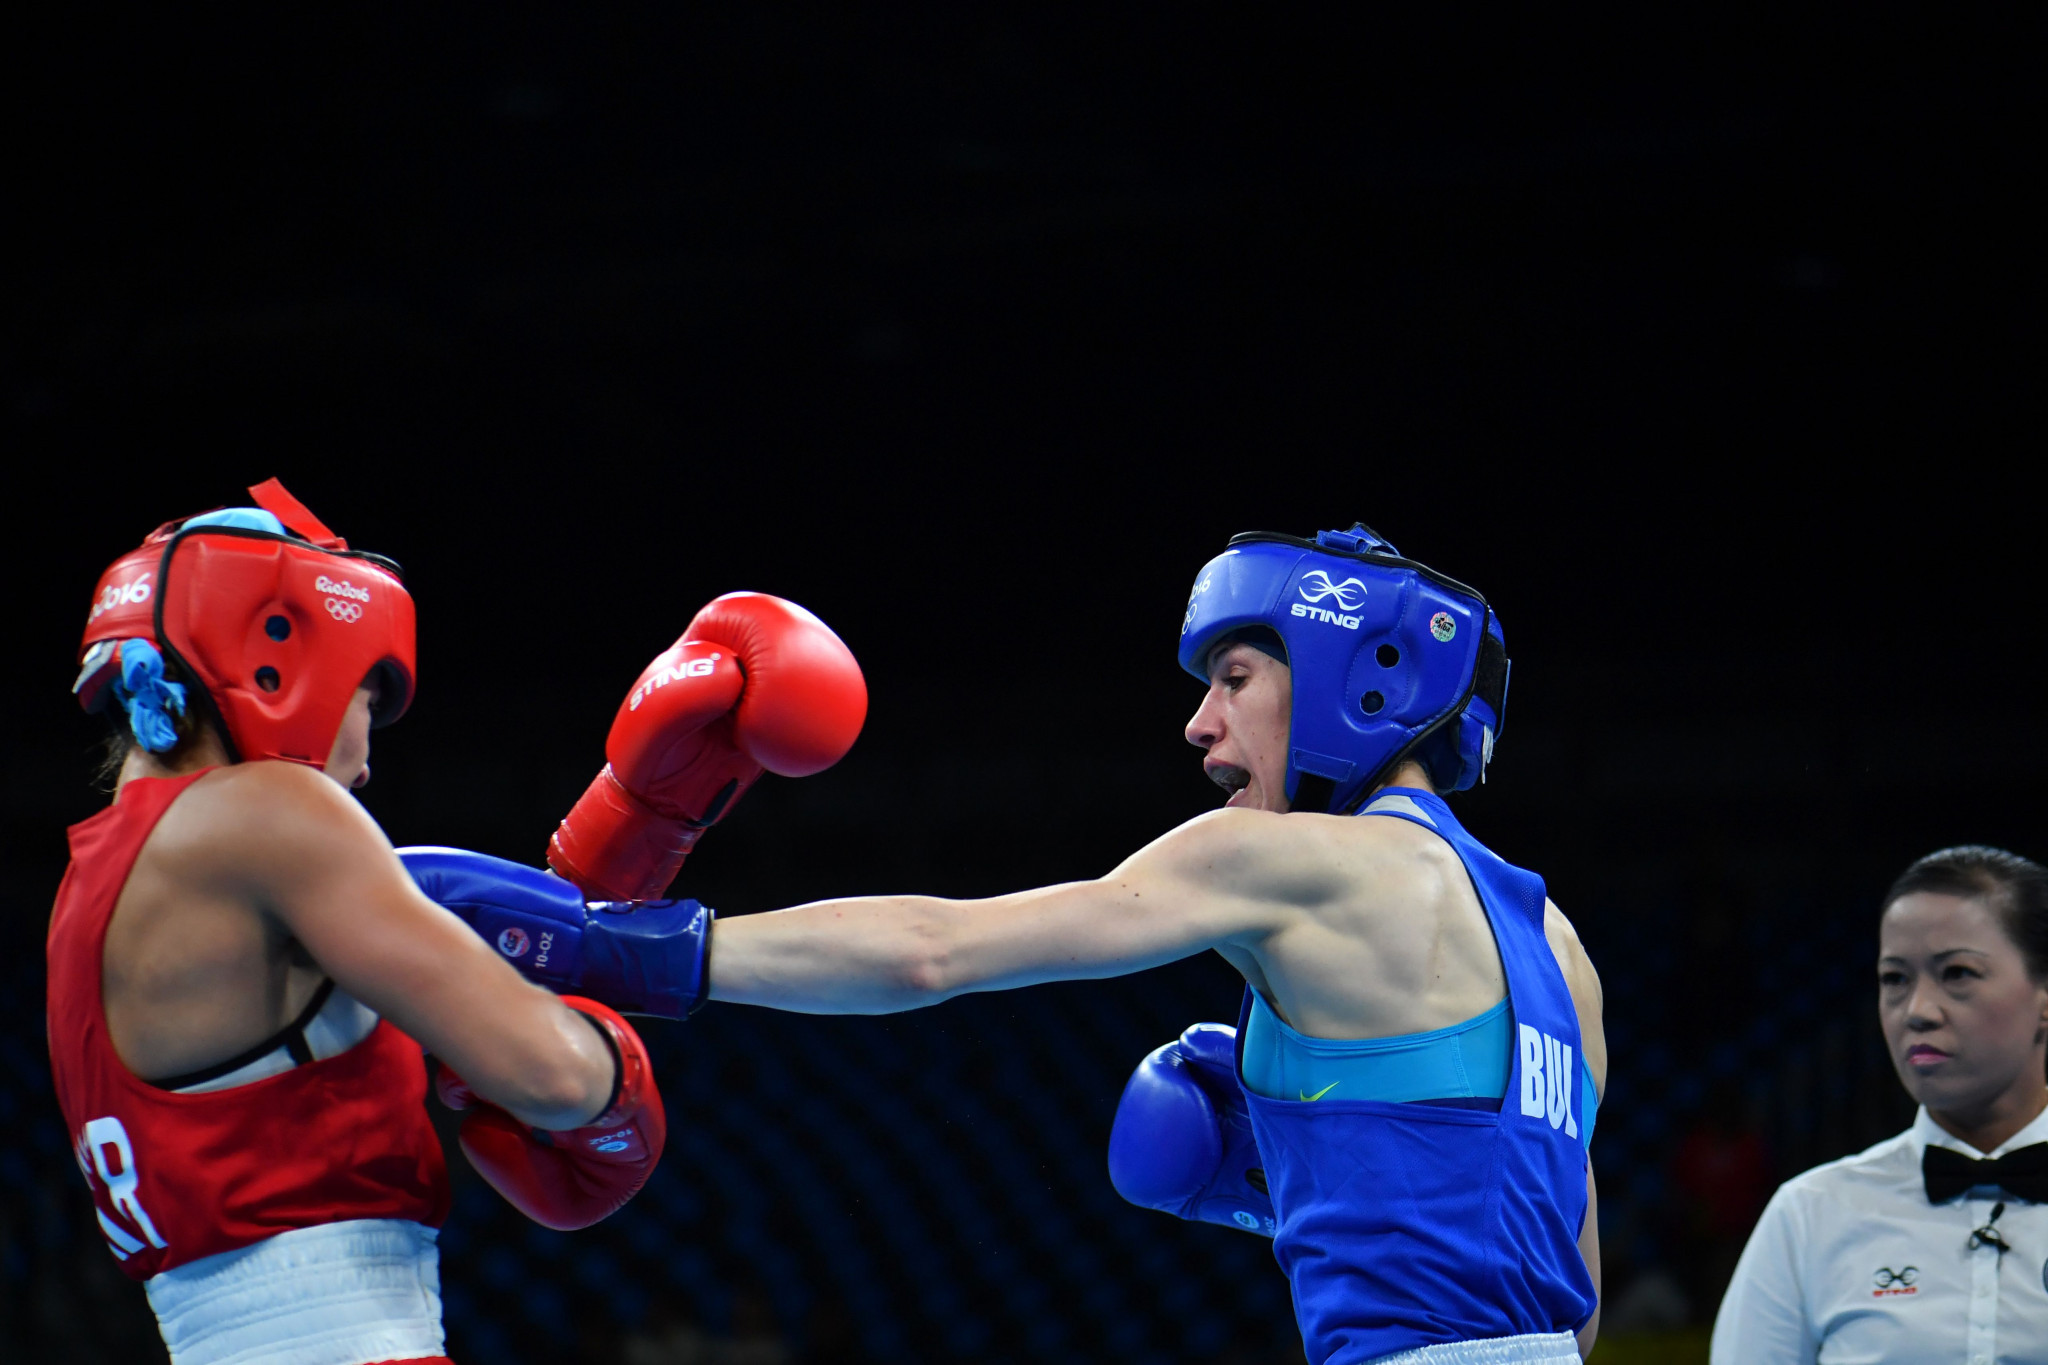 Amateur boxing is the latest sport to hand over its anti-doping activities to the ITA ©Getty Images